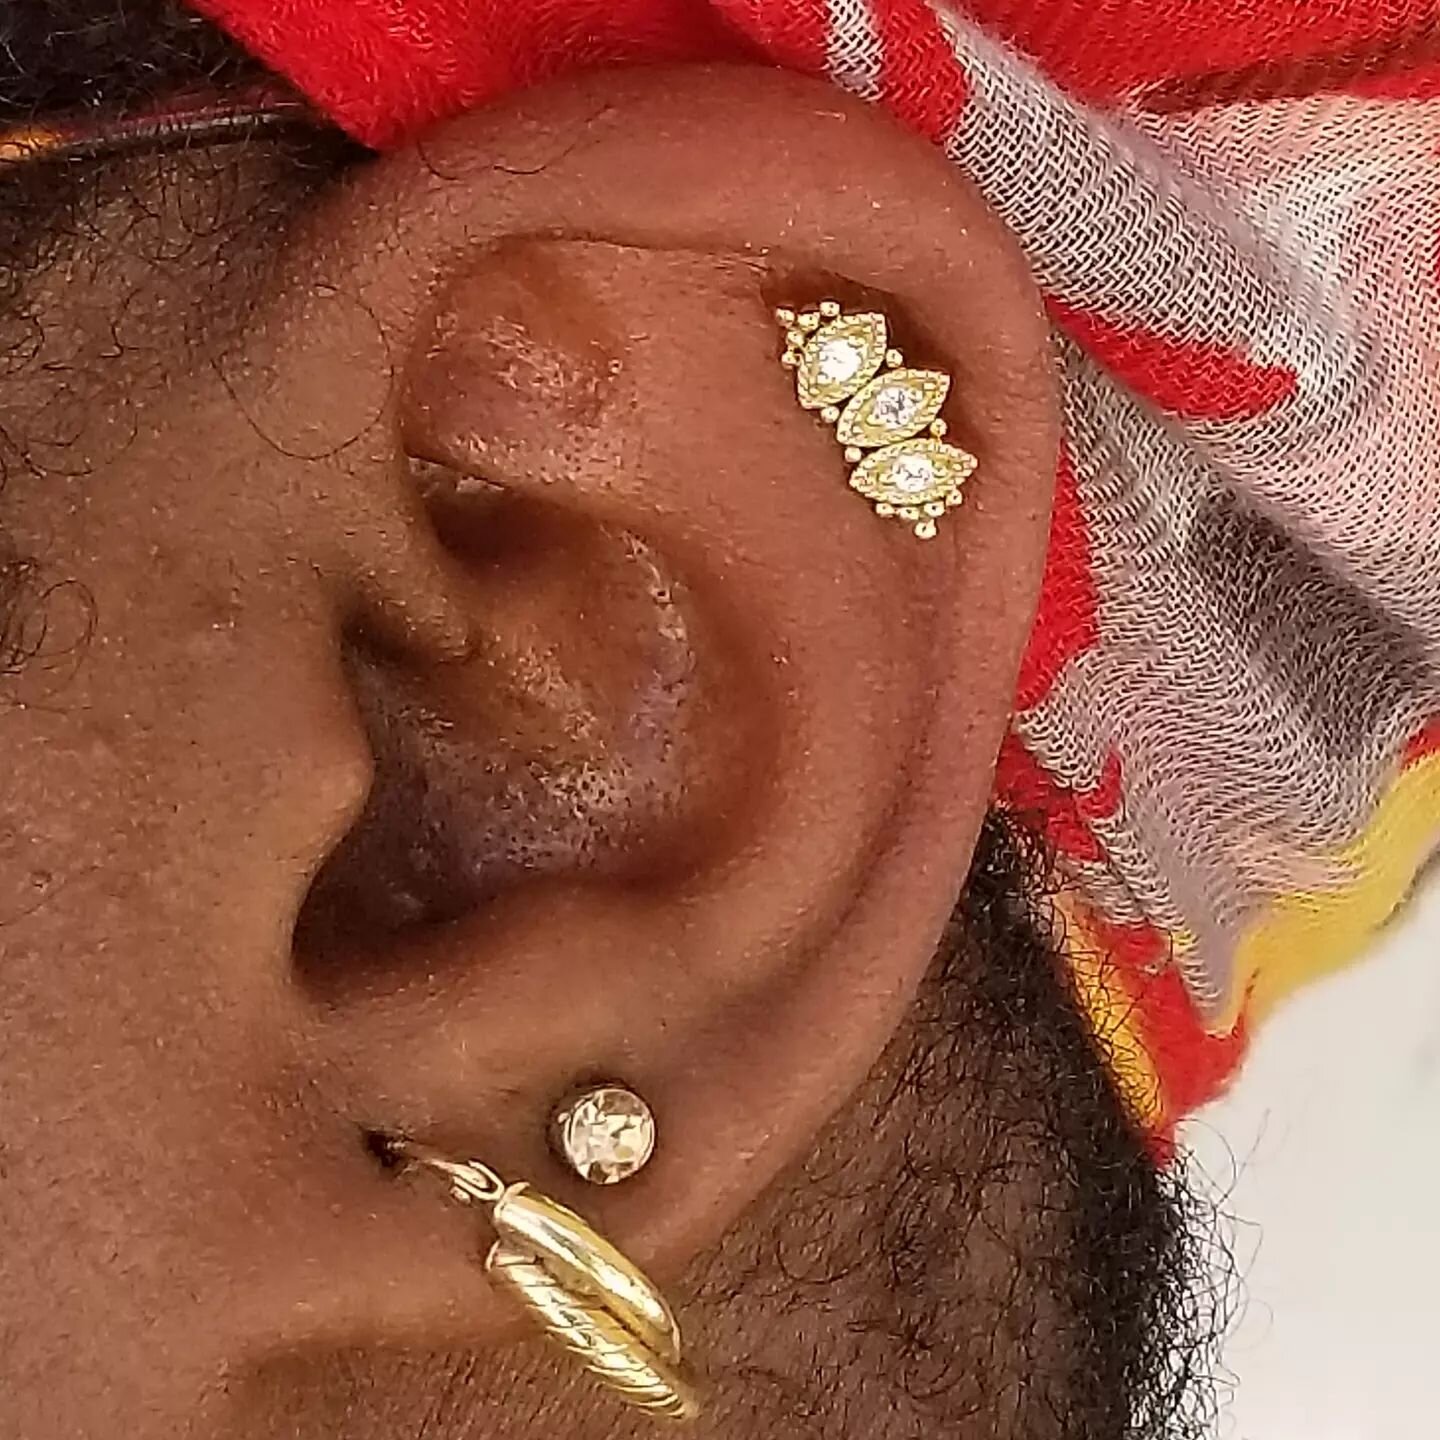 How gorgeous is this 14kt yellow gold Claudette from @leroifinejewellery ! Robert @piercingsbyrobert helped choose this for a perfectly complimented helix piercing. 

#helixpiercing #helix #earpiercing #cartilagepiercings #goldbodyjewelry #goldjewelr